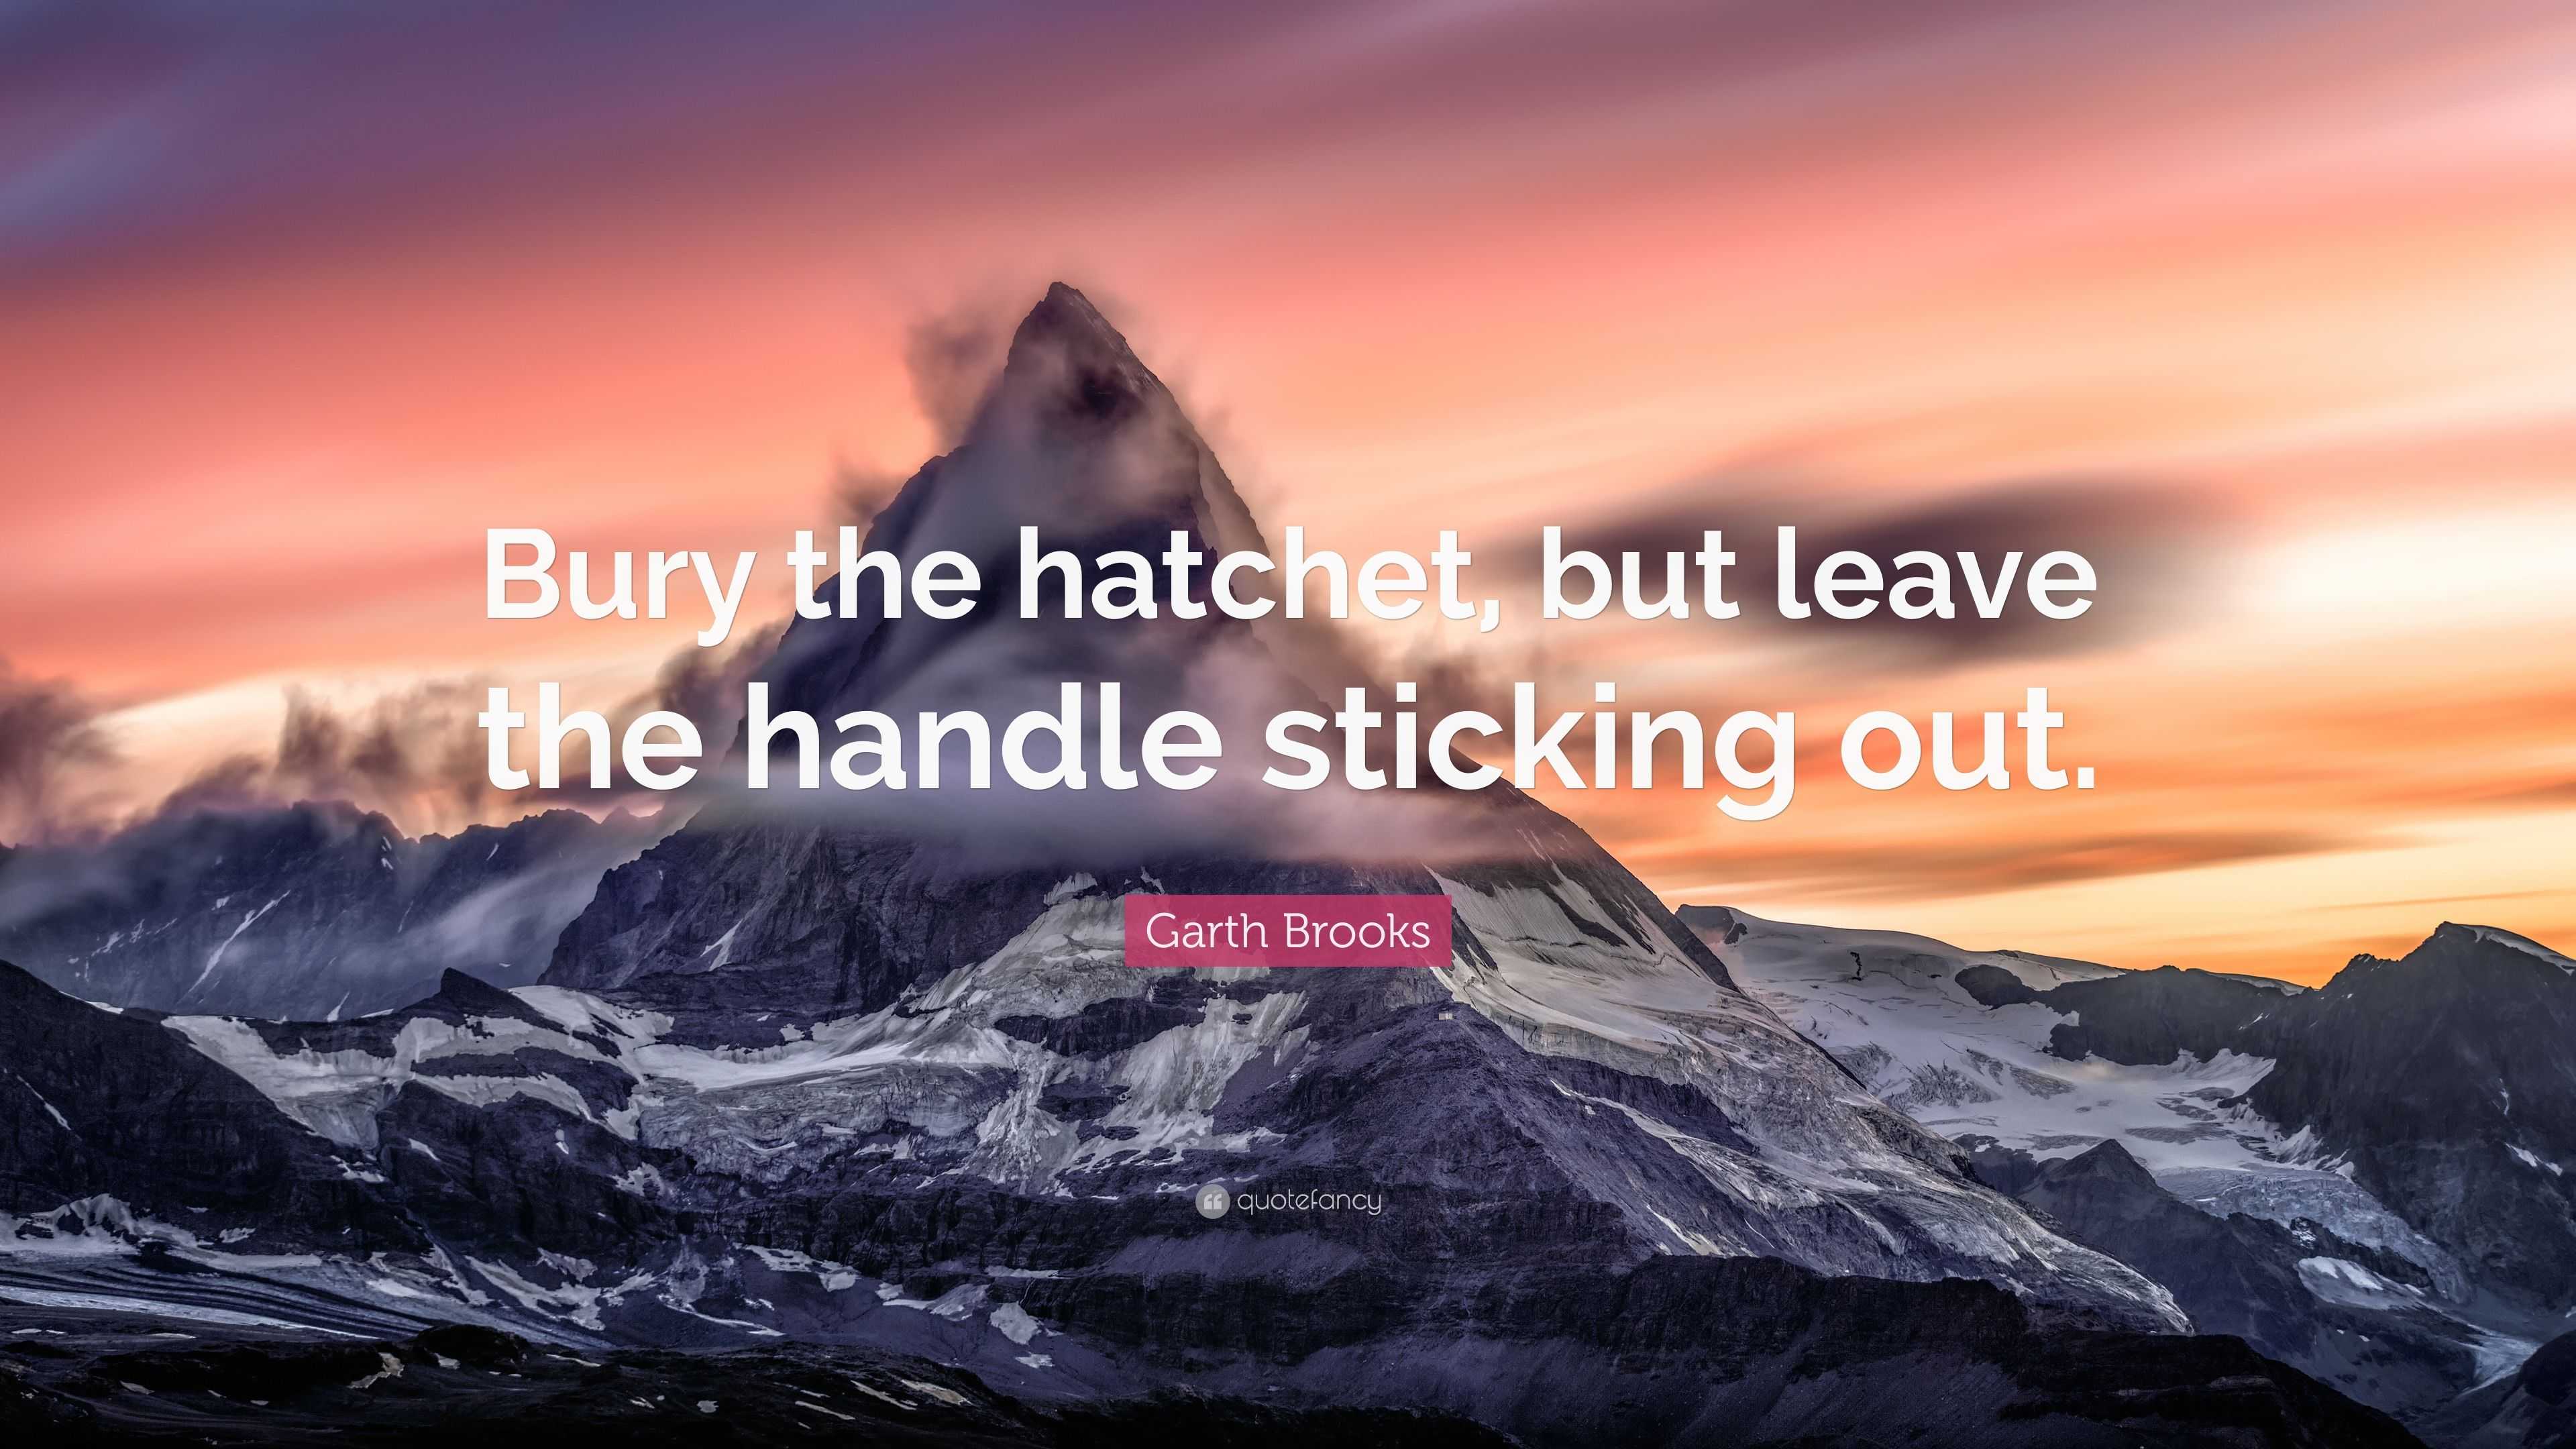 vægt Mekaniker Gøre mit bedste Garth Brooks Quote: “Bury the hatchet, but leave the handle sticking out.”